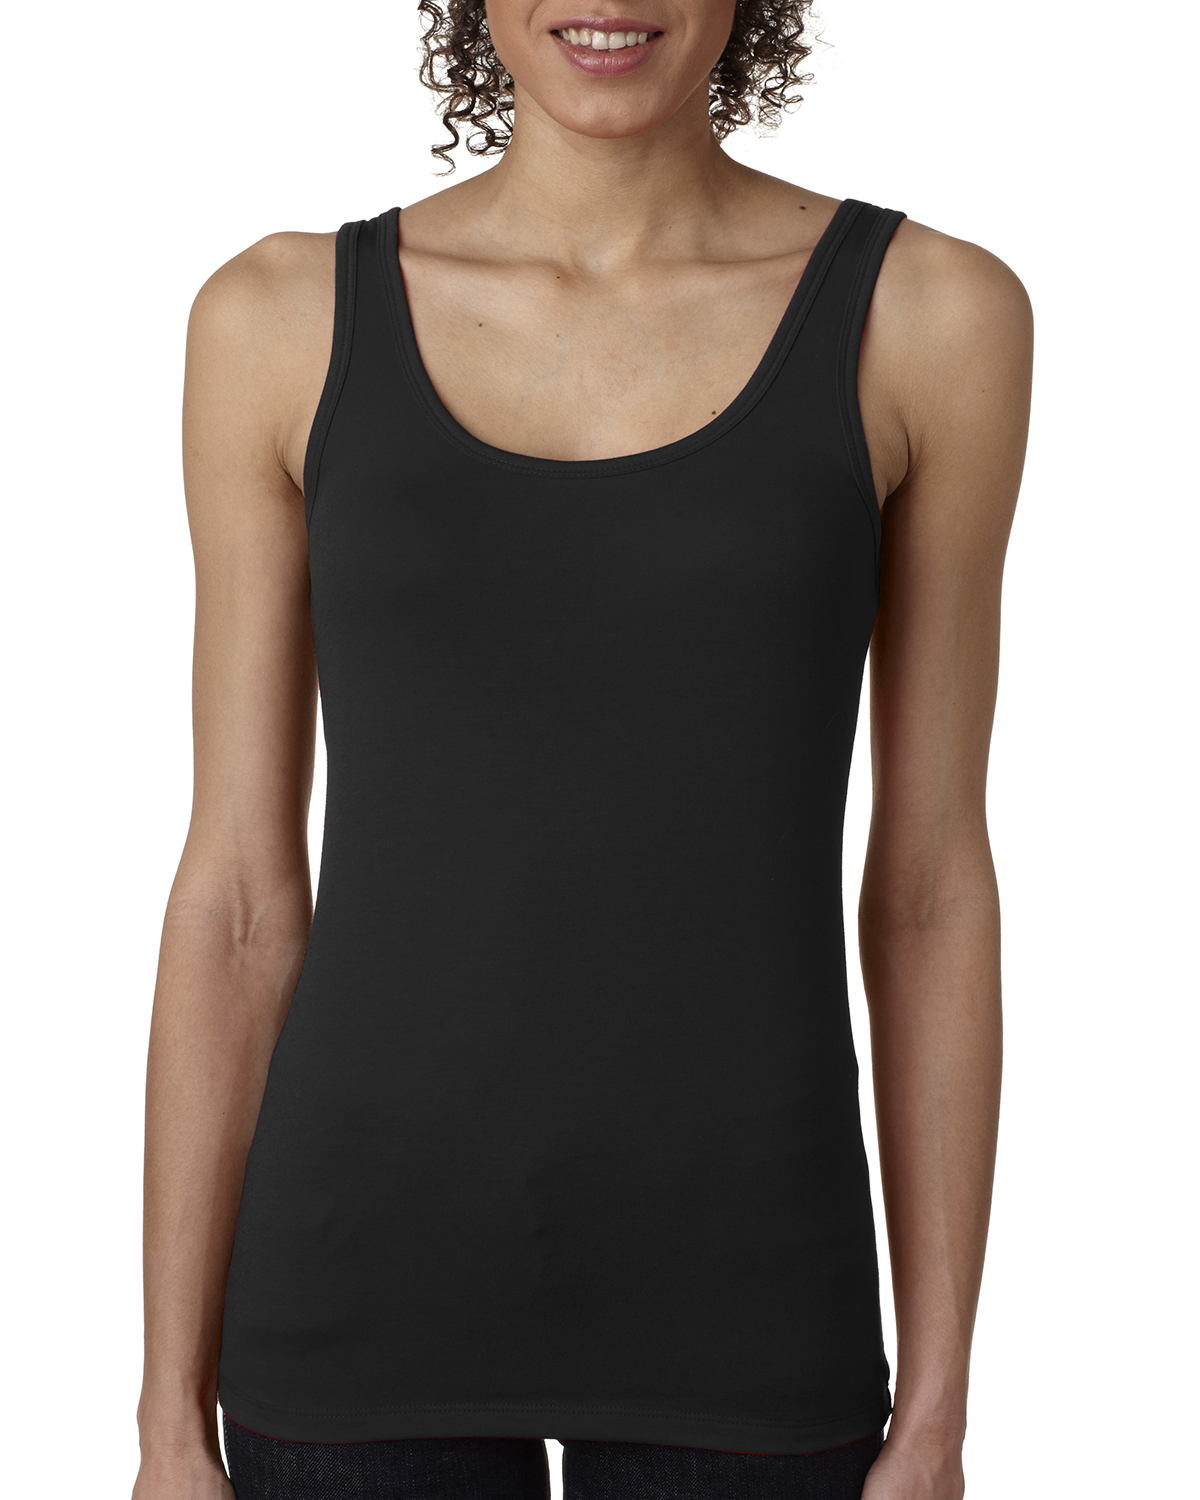 Next Level 3533-The Ladies Blended Jersey Tank